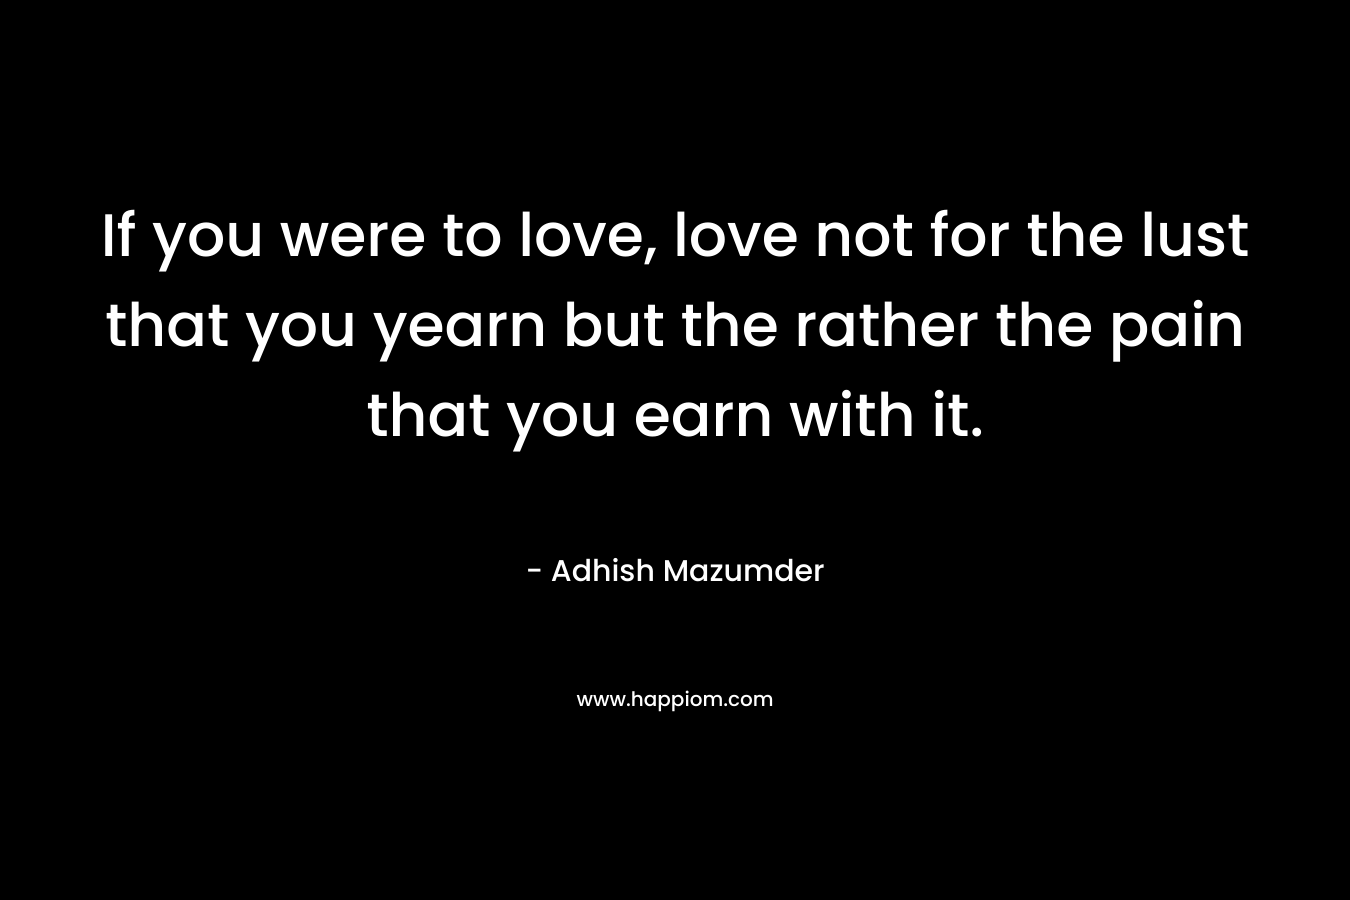 If you were to love, love not for the lust that you yearn but the rather the pain that you earn with it.